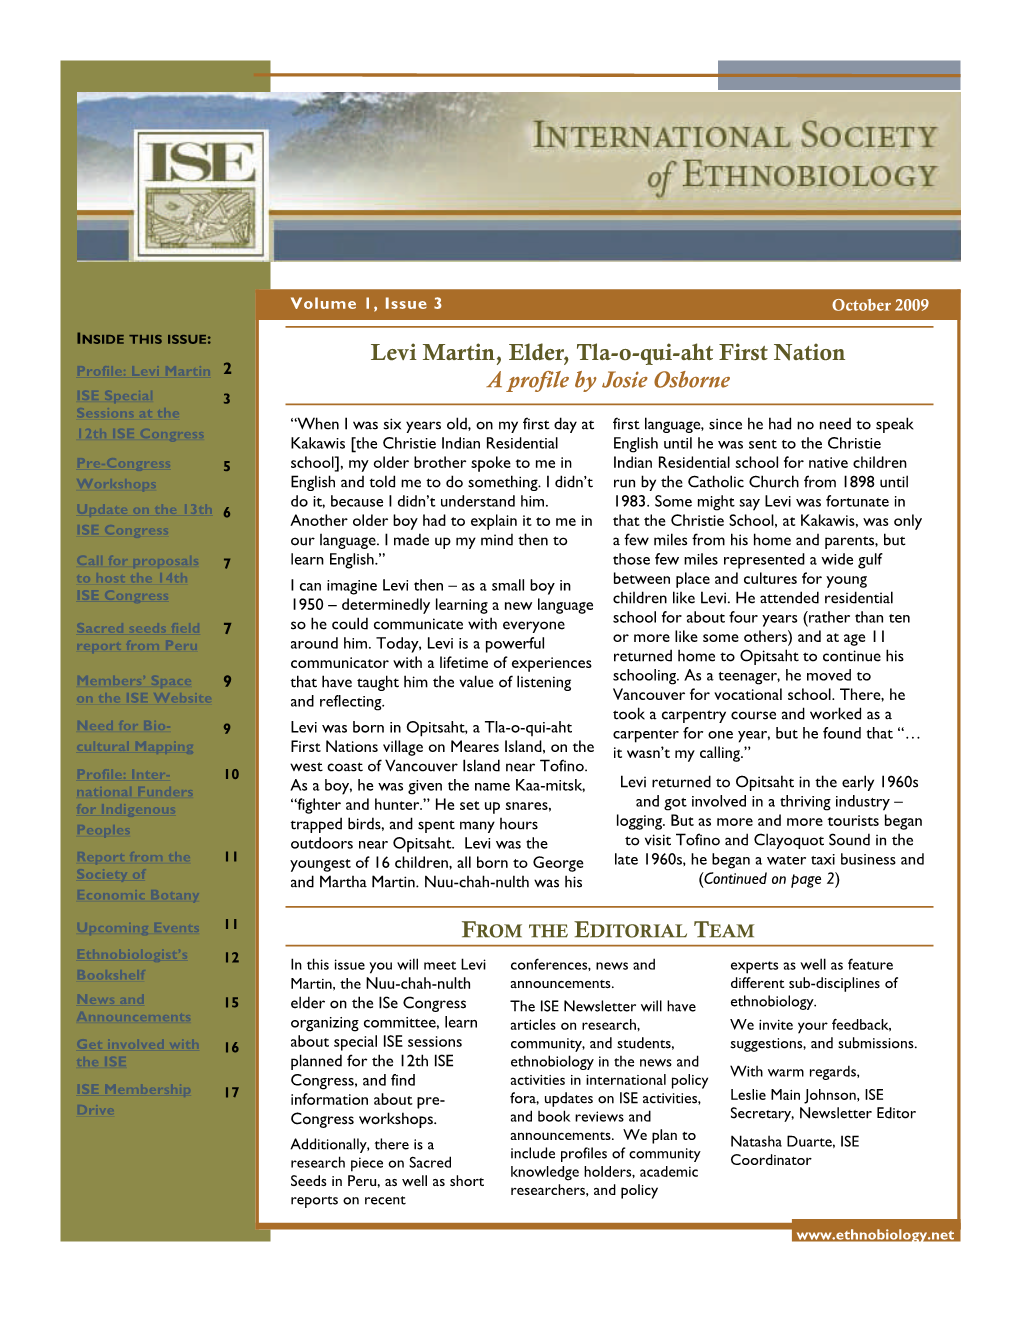 ISE Newsletter, Volume 1 Issue 3, Without Photos